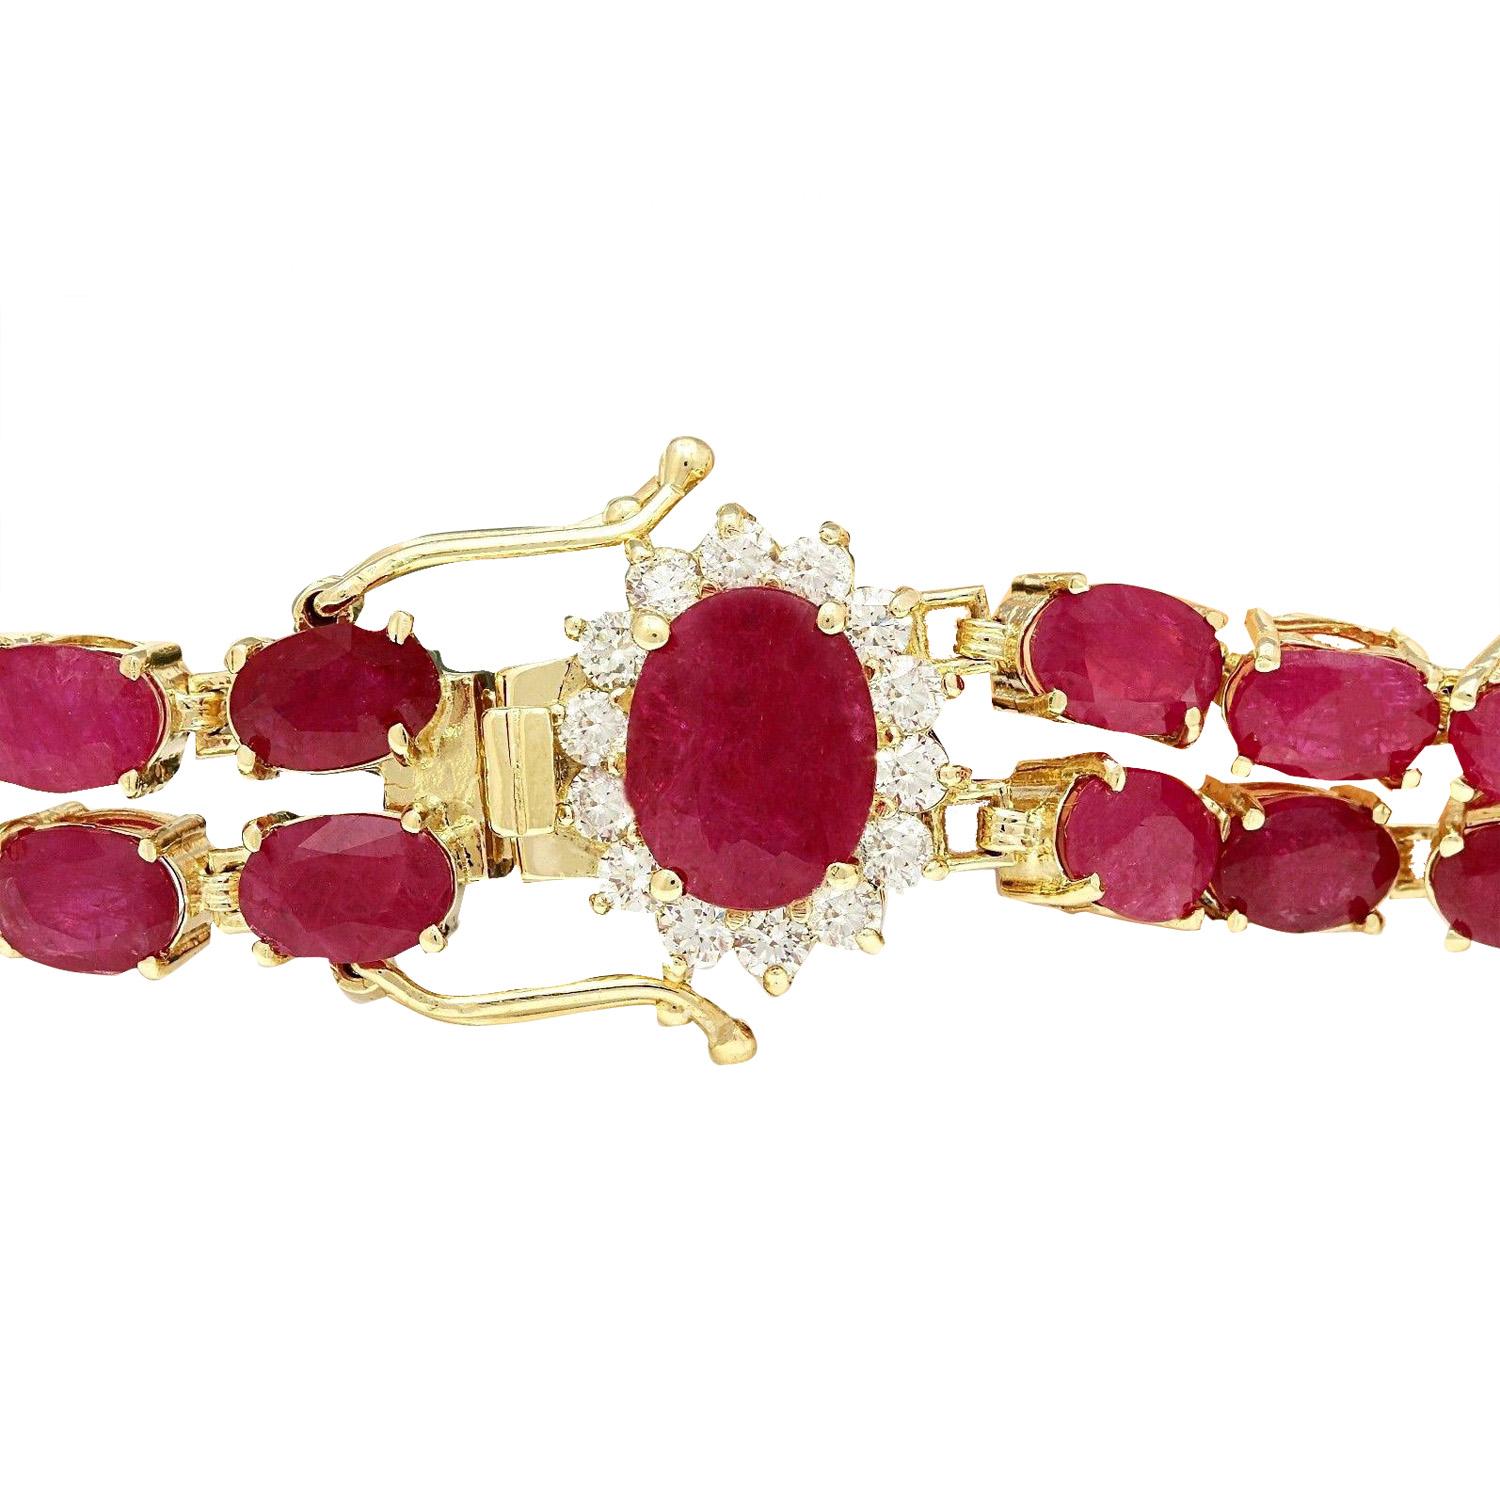 32.15 Carat Natural Ruby 14K Solid Yellow Gold Diamond Bracelet
 Item Type: Bracelet
 Item Style: Tennis
 Item Length: 7 Inches
 Item Width: 8.30 mm
 Material: 14K Yellow Gold
 Mainstone: Ruby
 Stone Color: Red
 Stone Weight: 29.50 Carat
 Stone